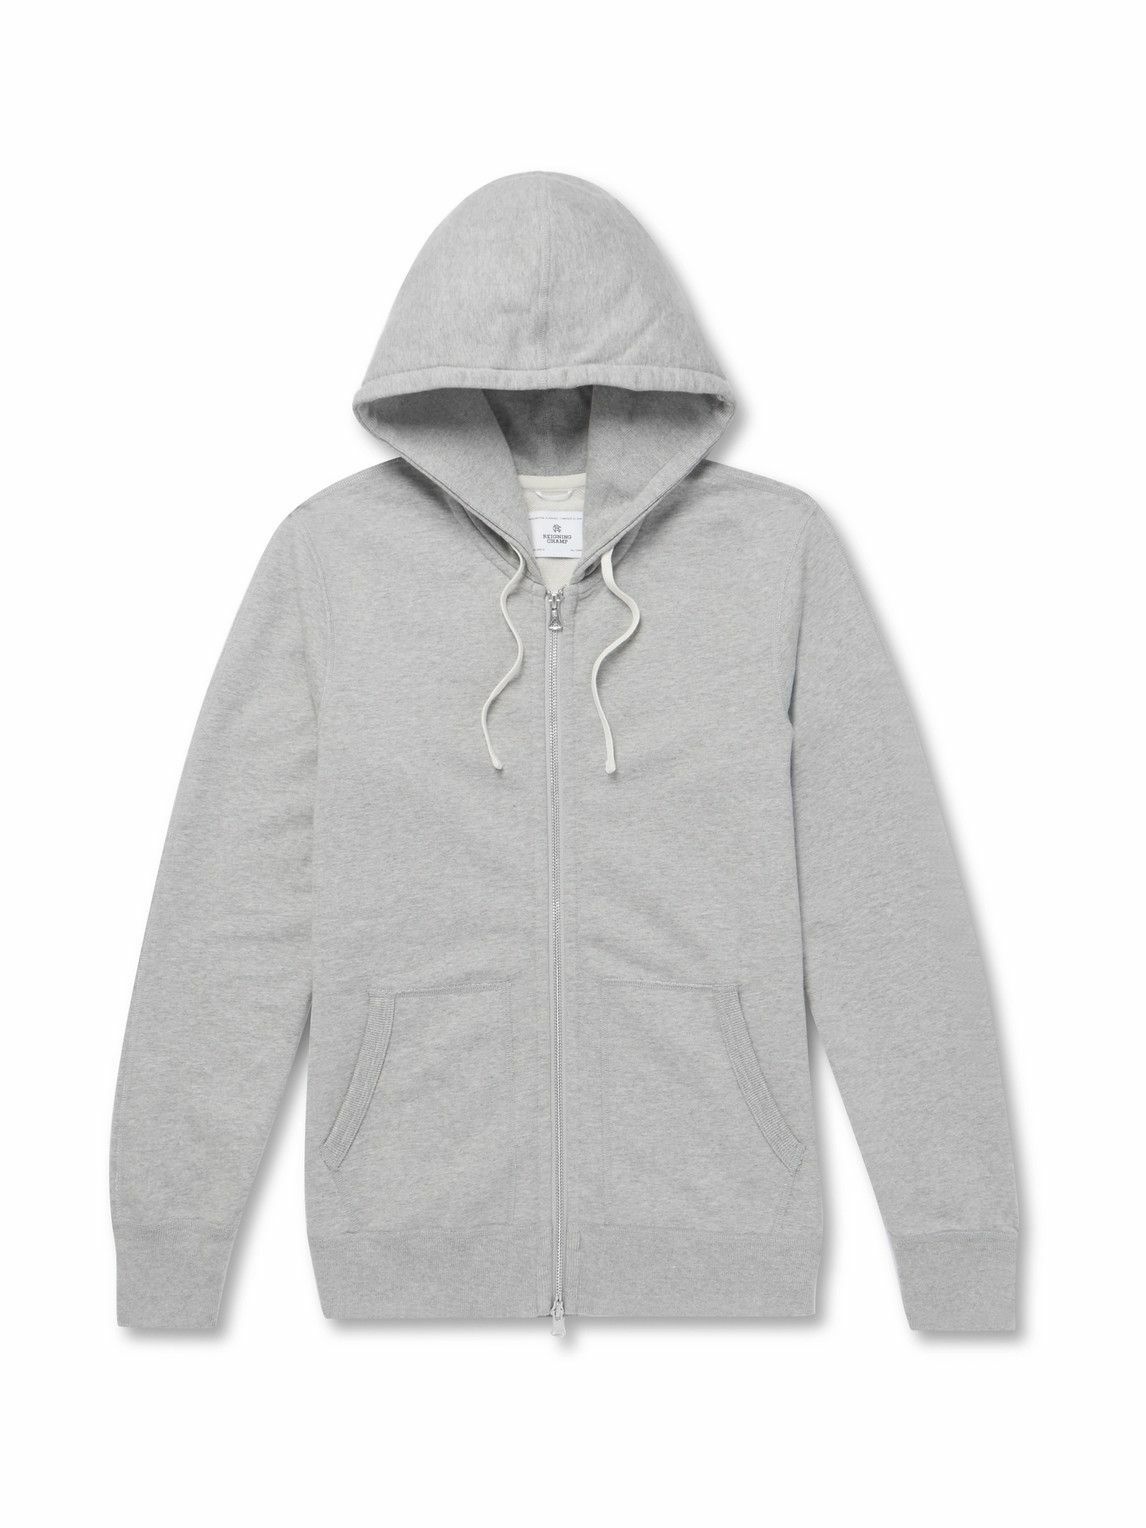 Photo: Reigning Champ - Slim-Fit Mélange Loopback Cotton-Jersey Zip-Up Hoodie - Gray